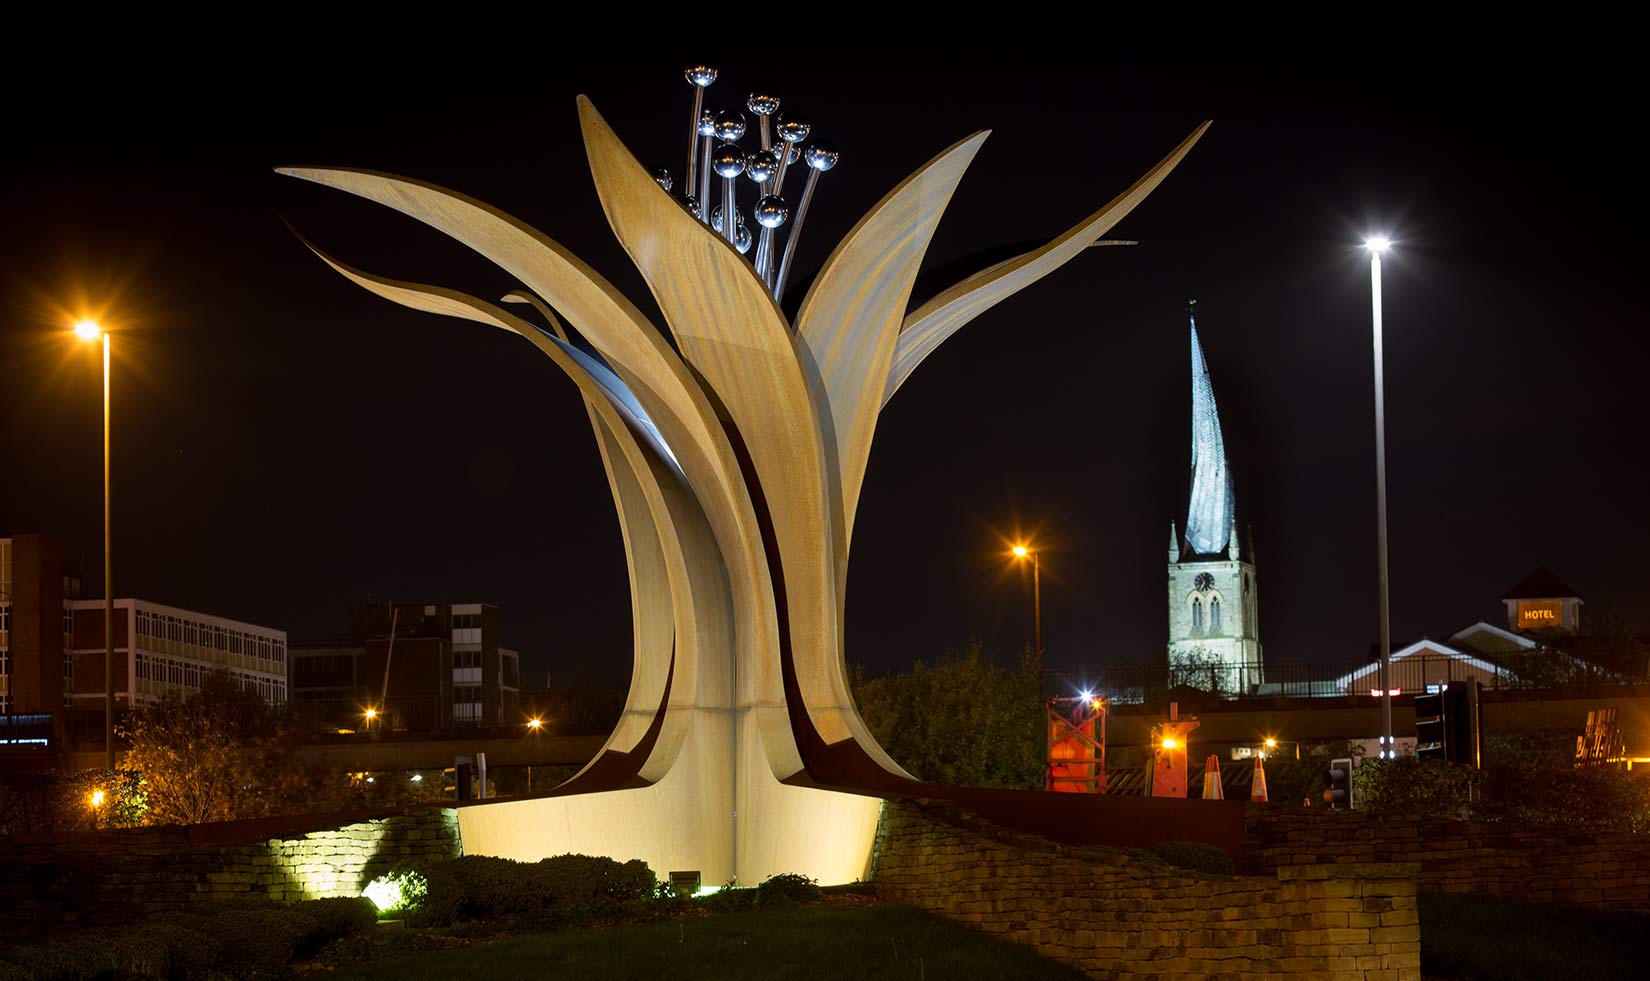 Destination Marketing Photography The growth Sculpture in chesterfield, Derbyshire with the crooked spire in the background to the right. Shot at nigh both are lit with lights